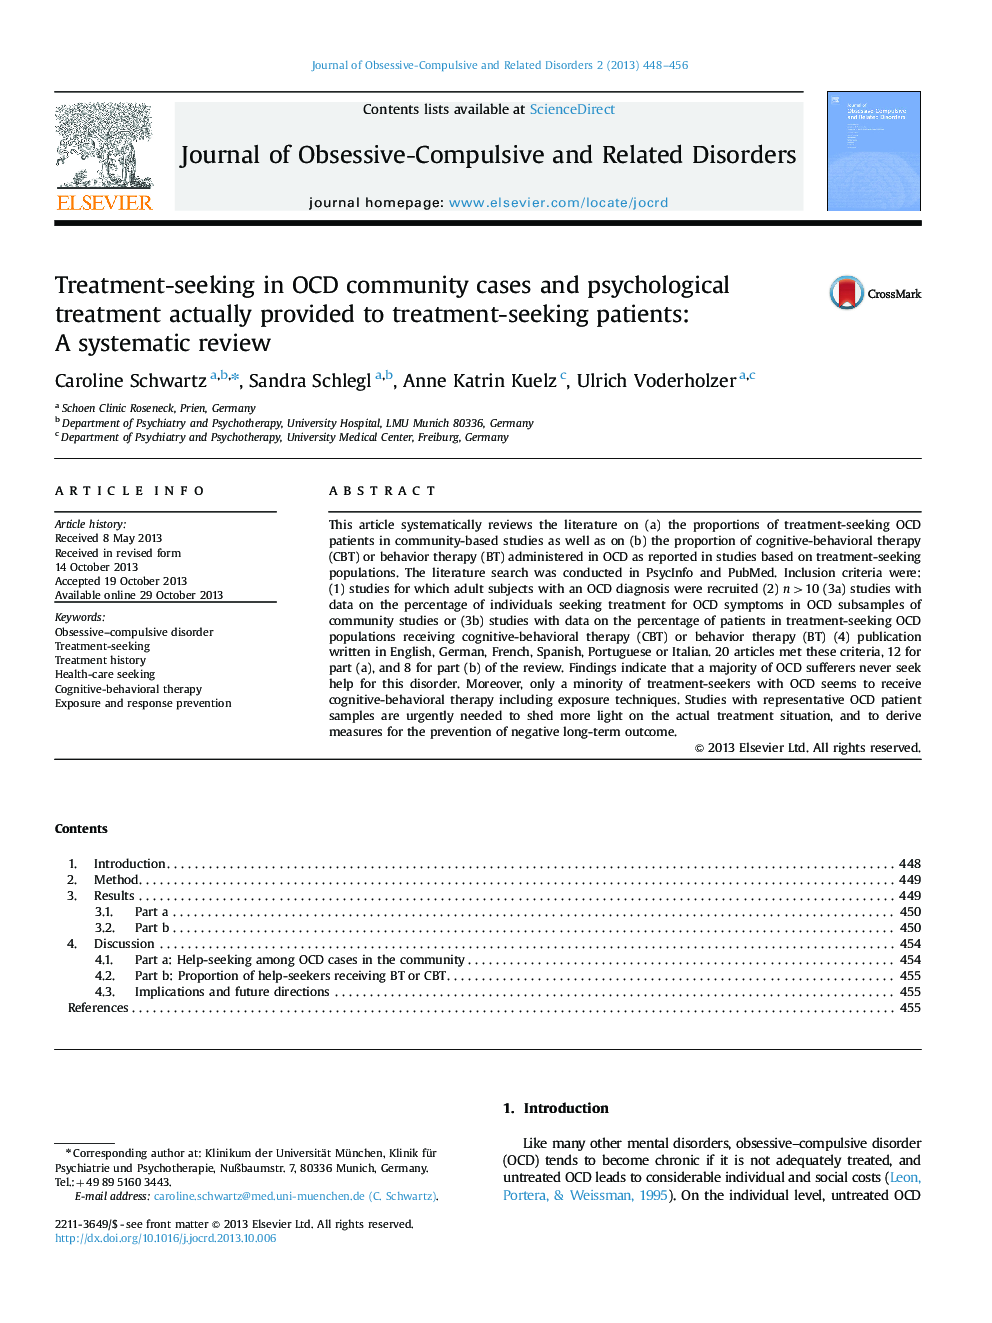 Treatment-seeking in OCD community cases and psychological treatment actually provided to treatment-seeking patients: A systematic review